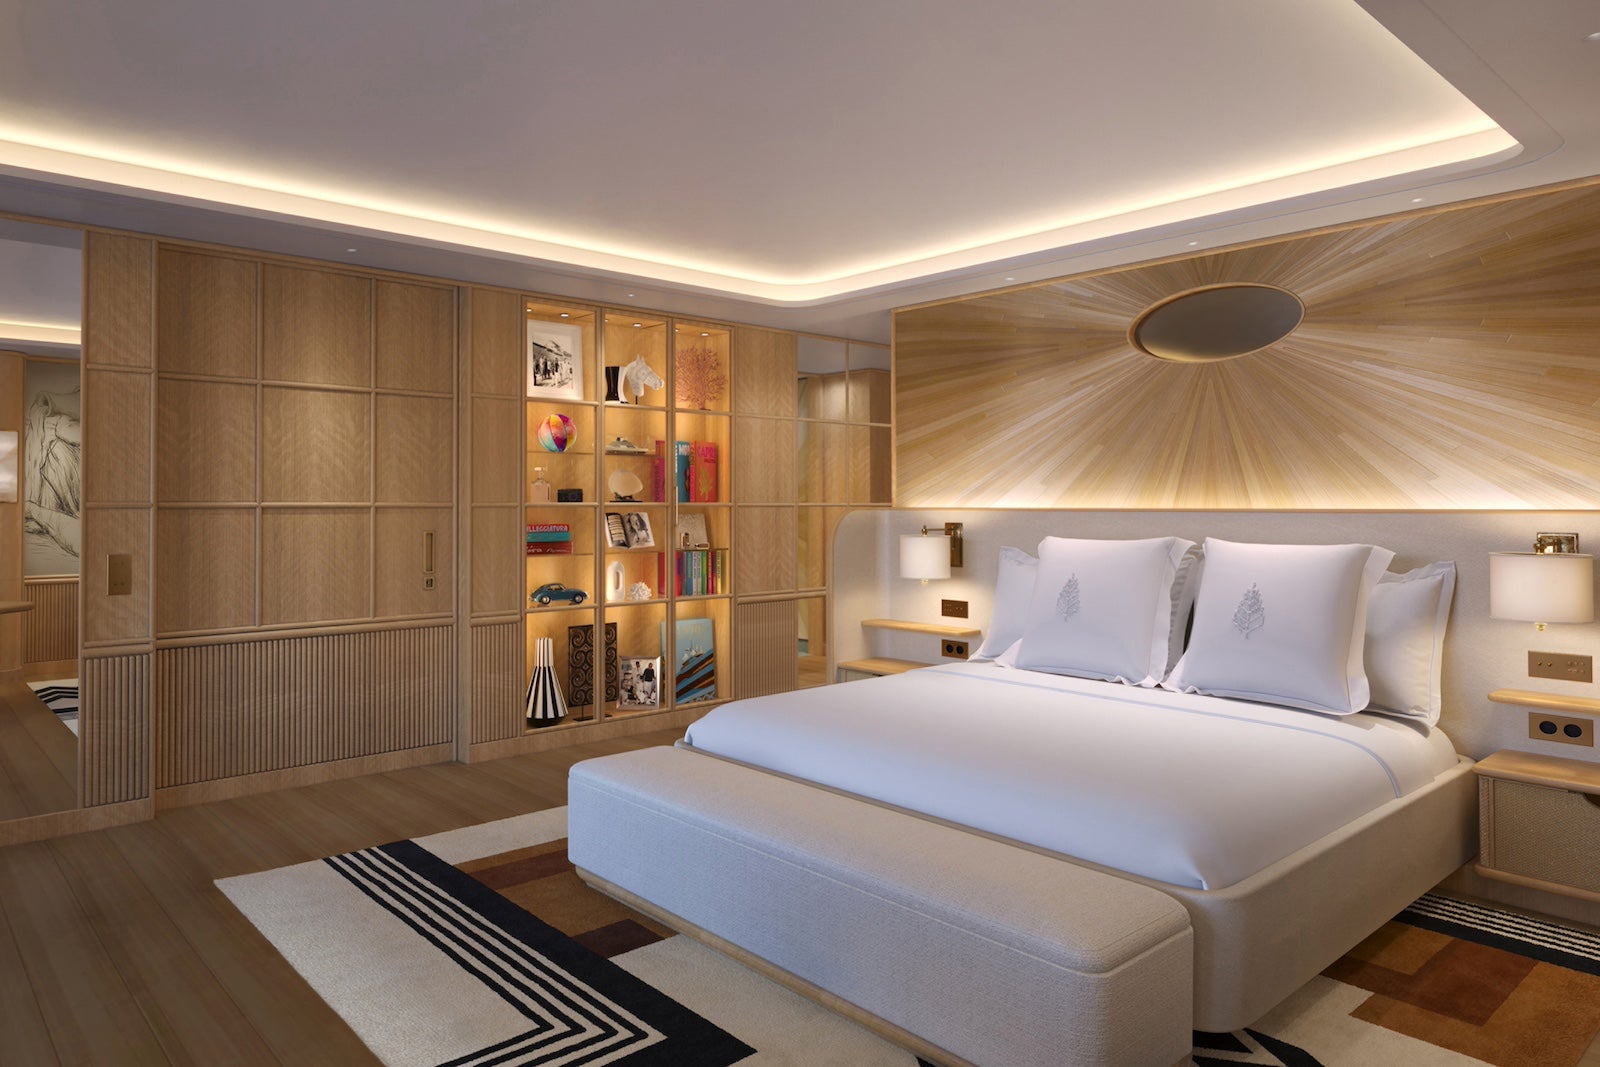 a rendering of a cruise ship cabin decorated in shades of beige and white